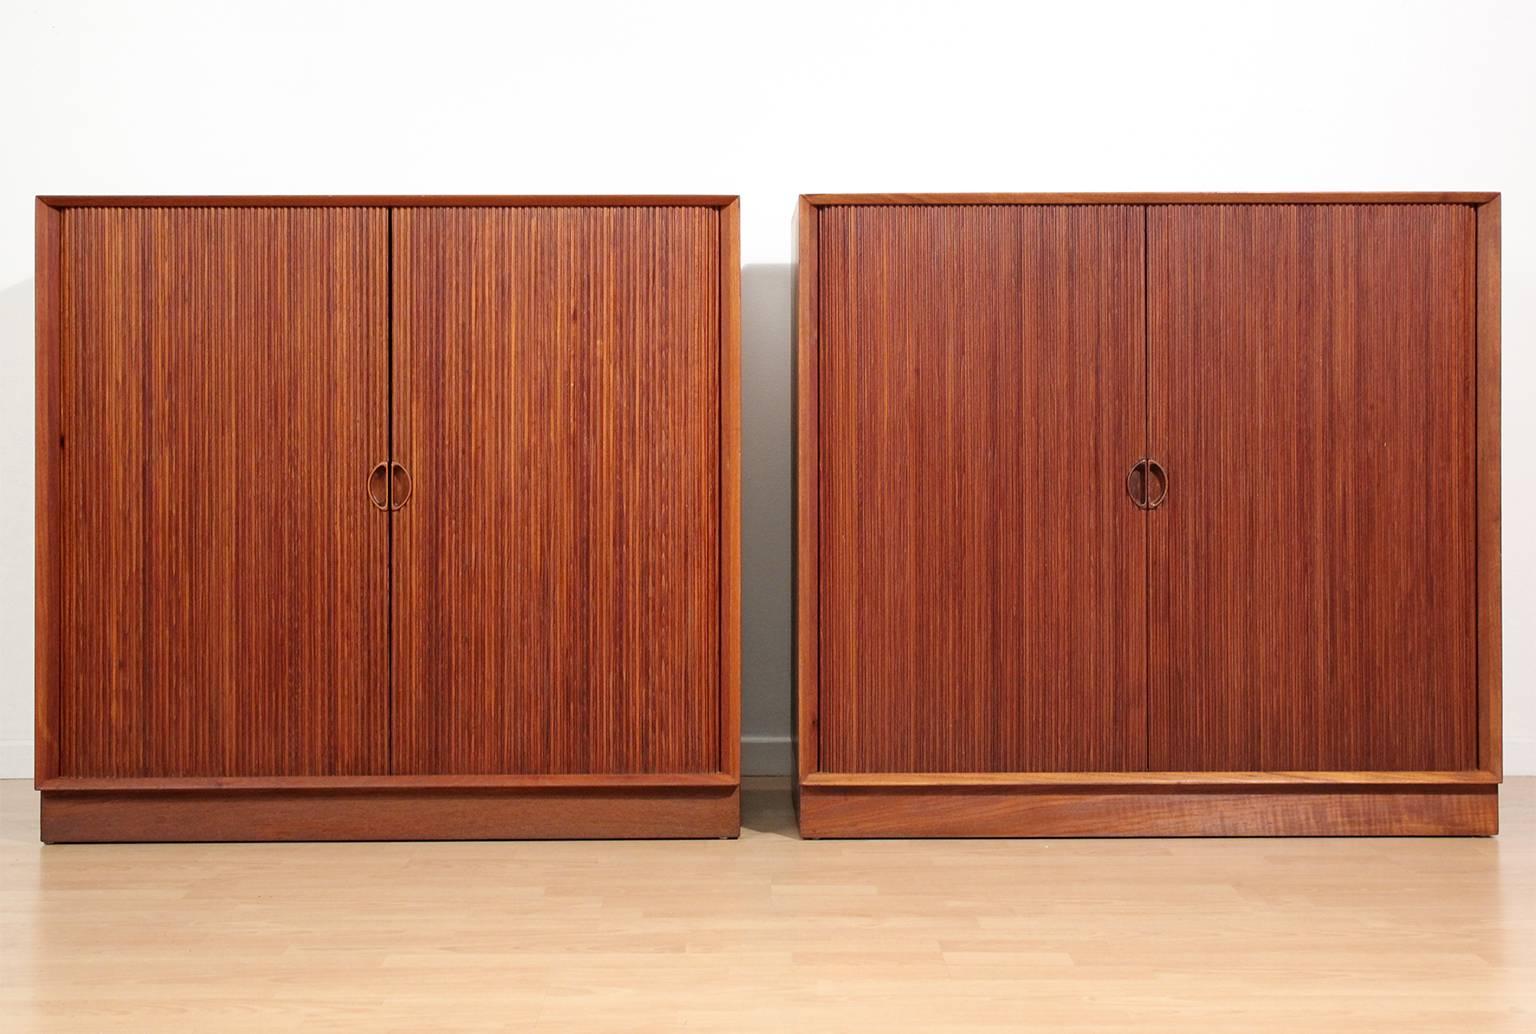 Great pair of Danish teak tambour chests or buffets by Peter Hvidt & Orla Mølgaard Nielsen. Chests feature two interior adjustable shelves. Doors open and close as they should. In excellent condition with no issues. These have been hand oiled and